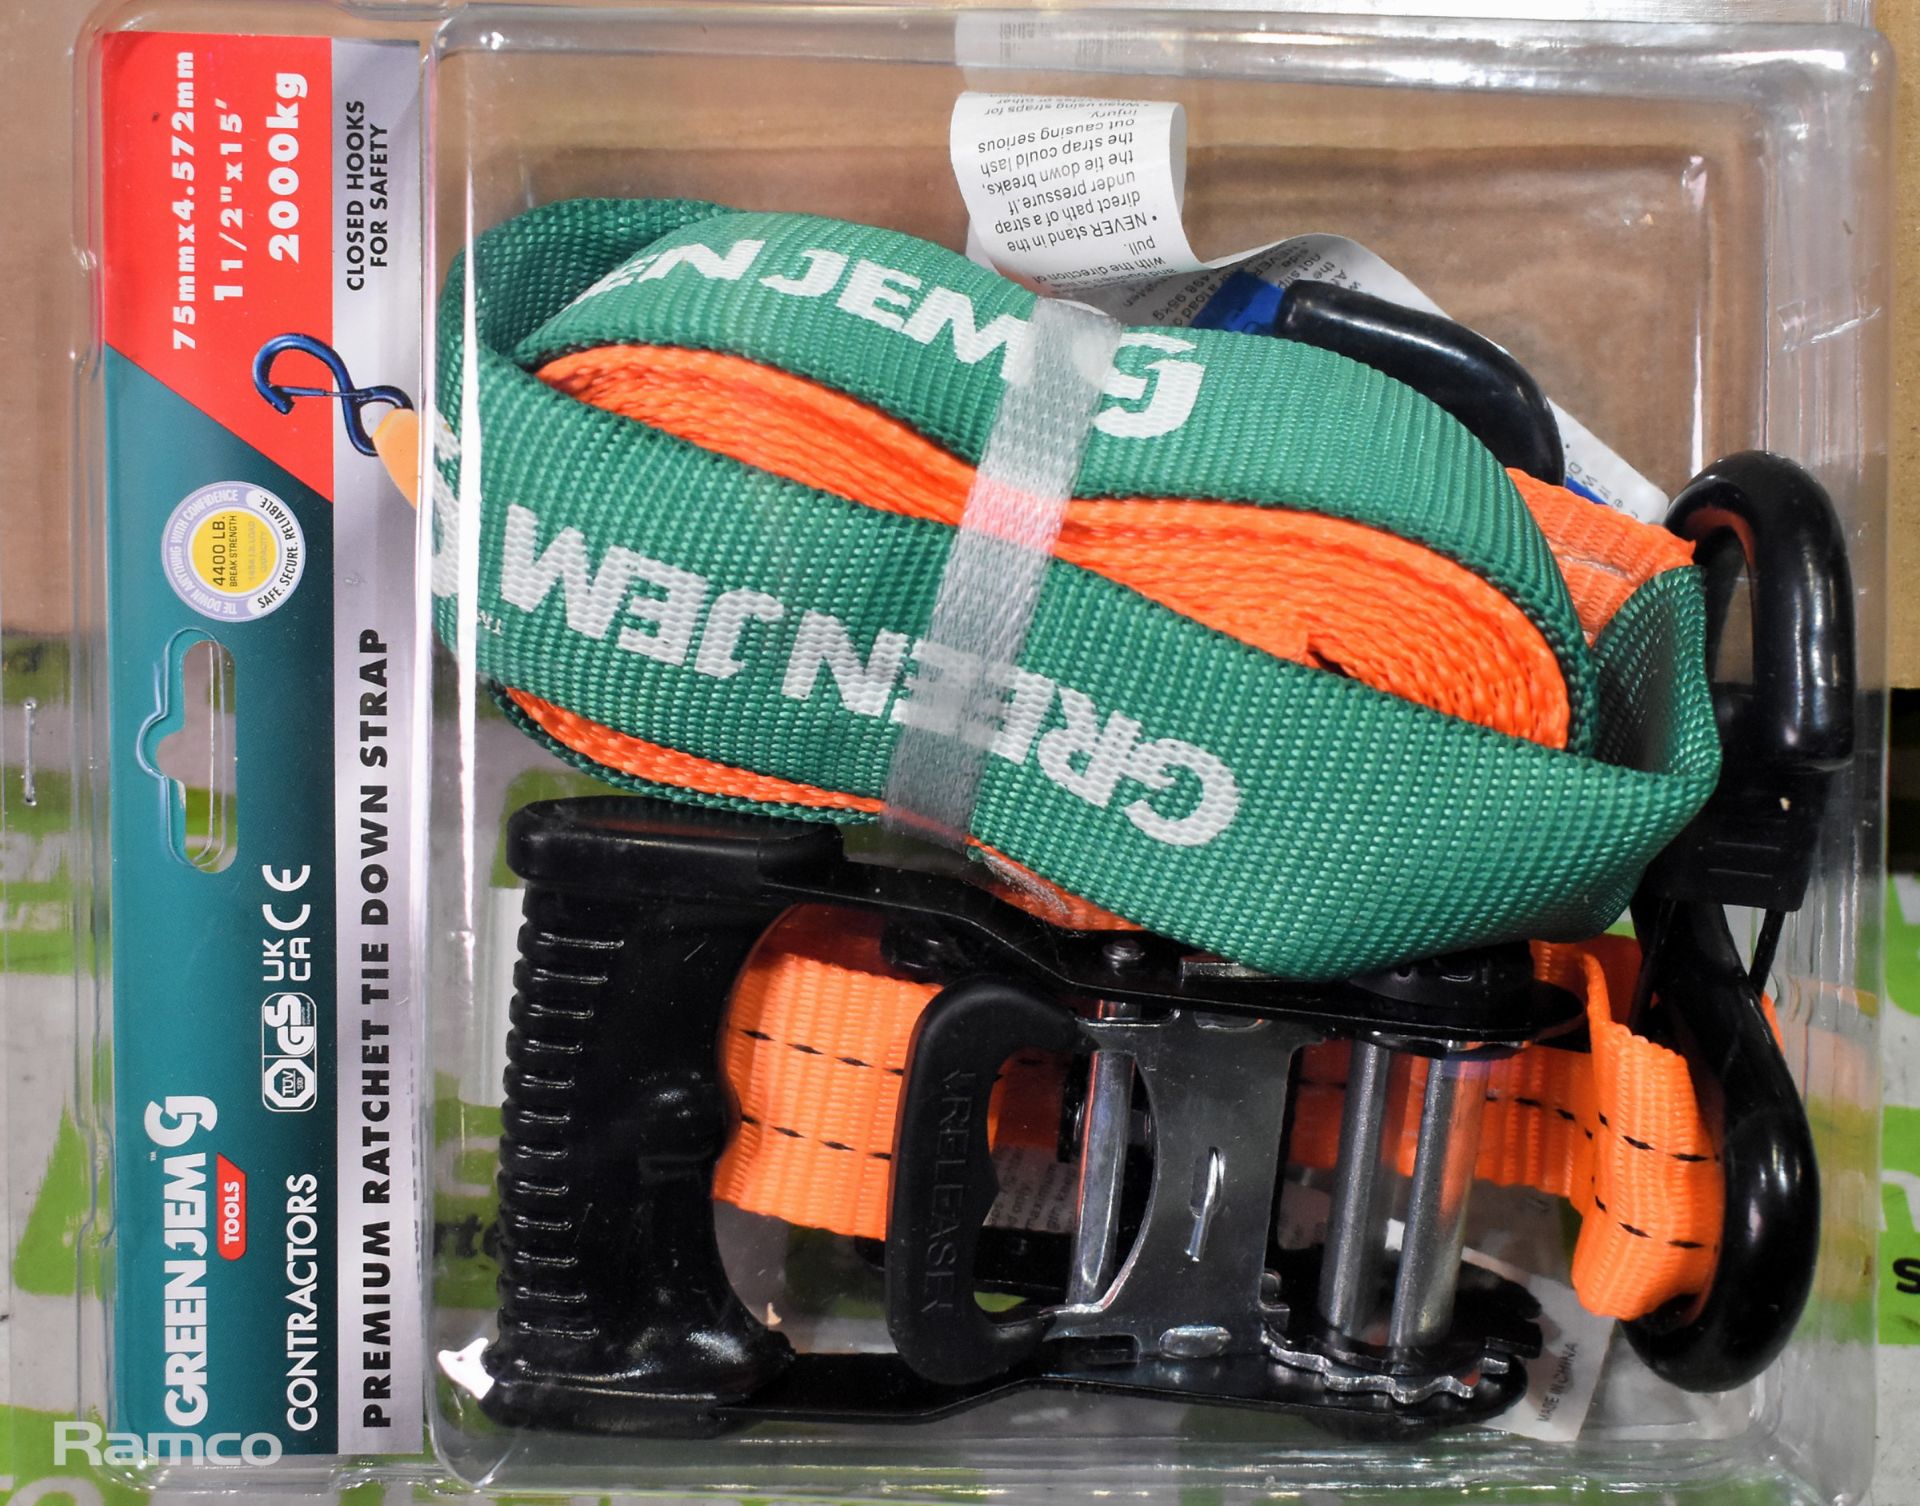 2x 16 piece stubby spanner sets, 6x twin pack 4.5m ratchet tie downs, 4x Green Jem ratchet straps - Image 9 of 9